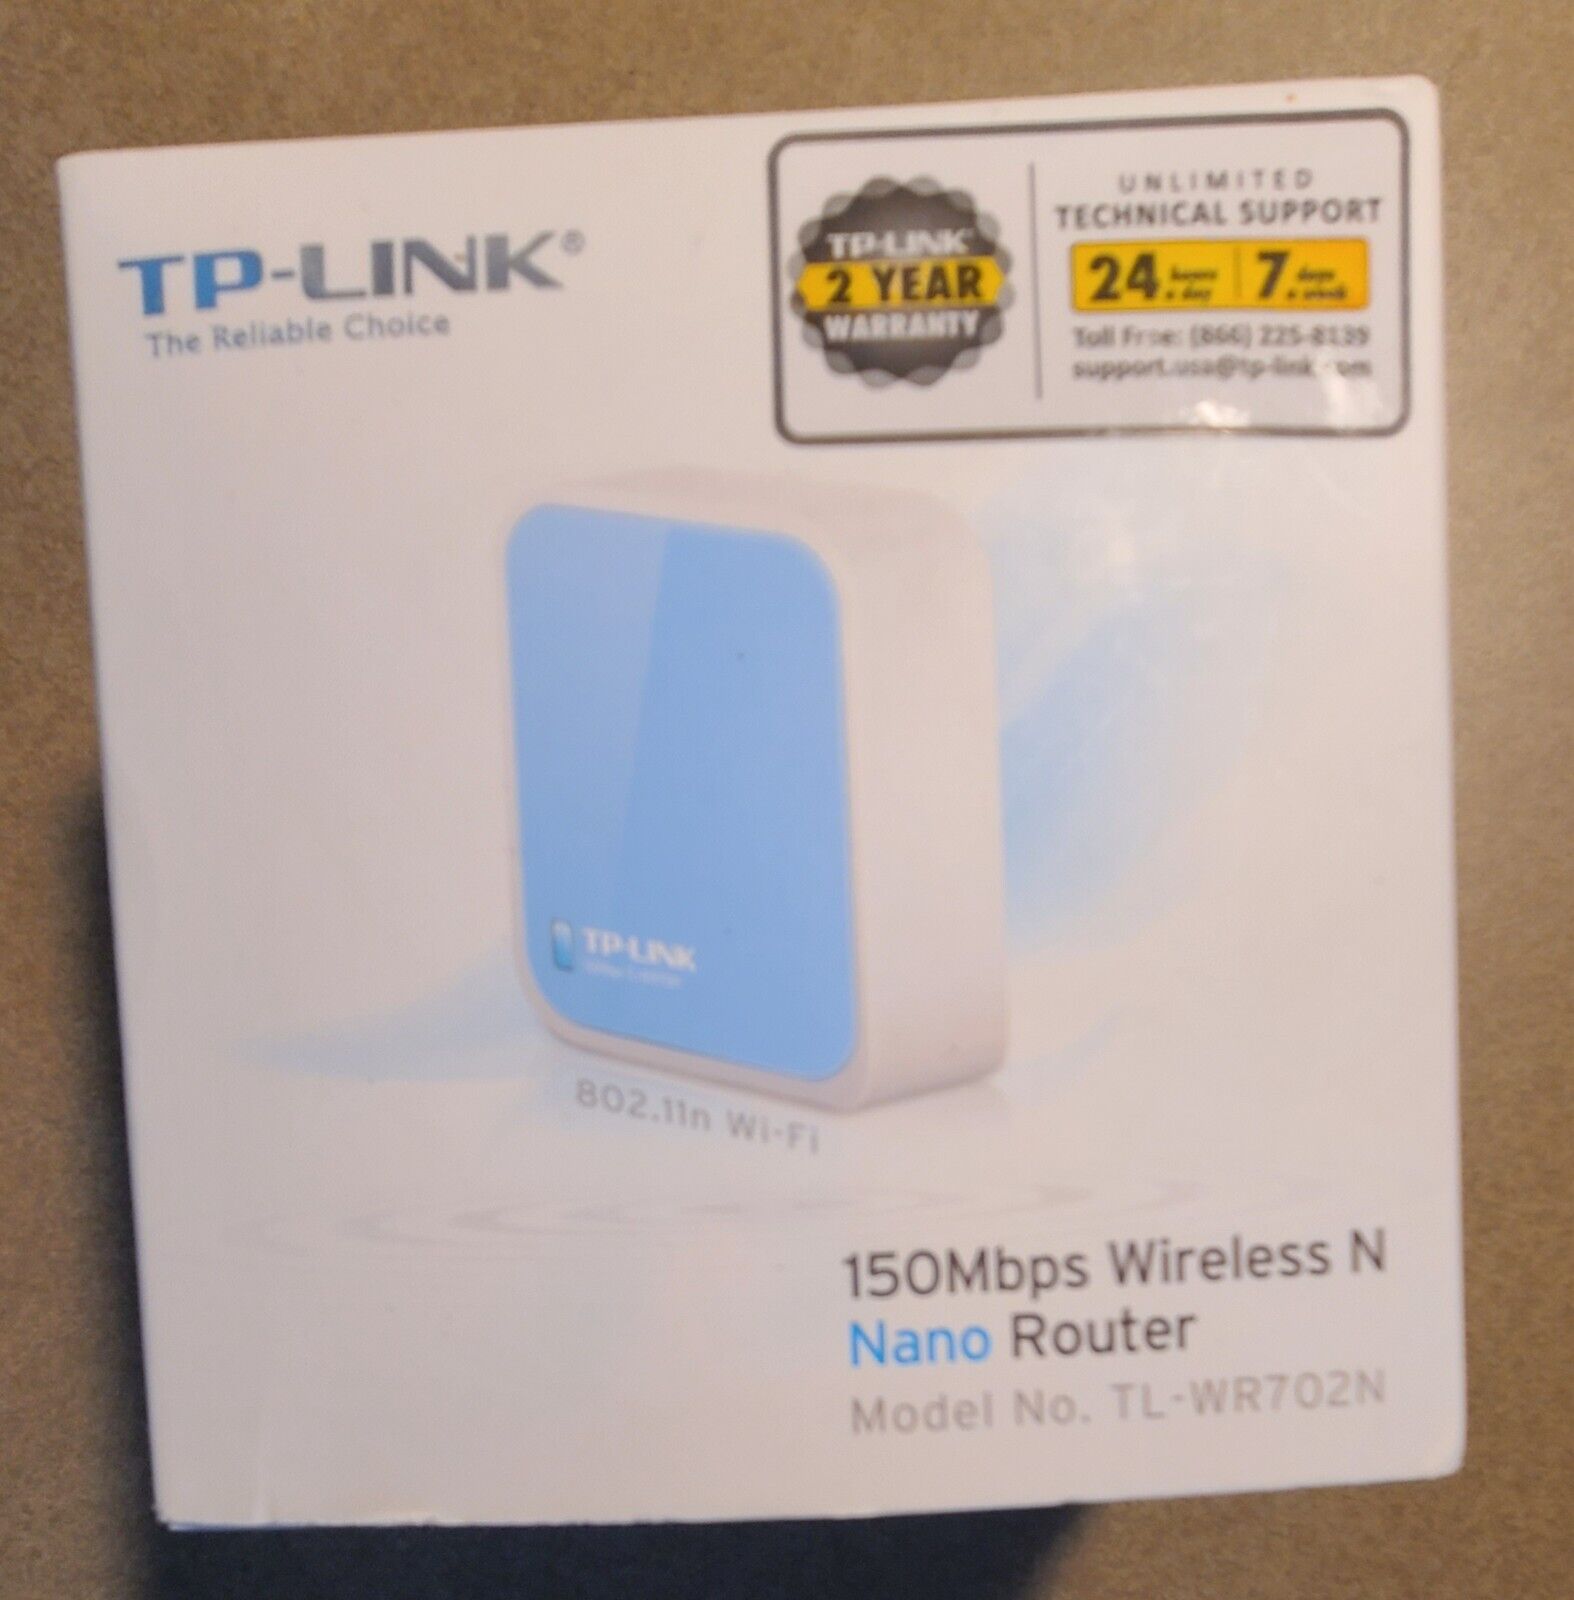  TP-LINK TL-WR702N Wireless N Travel Router - NEW in box 